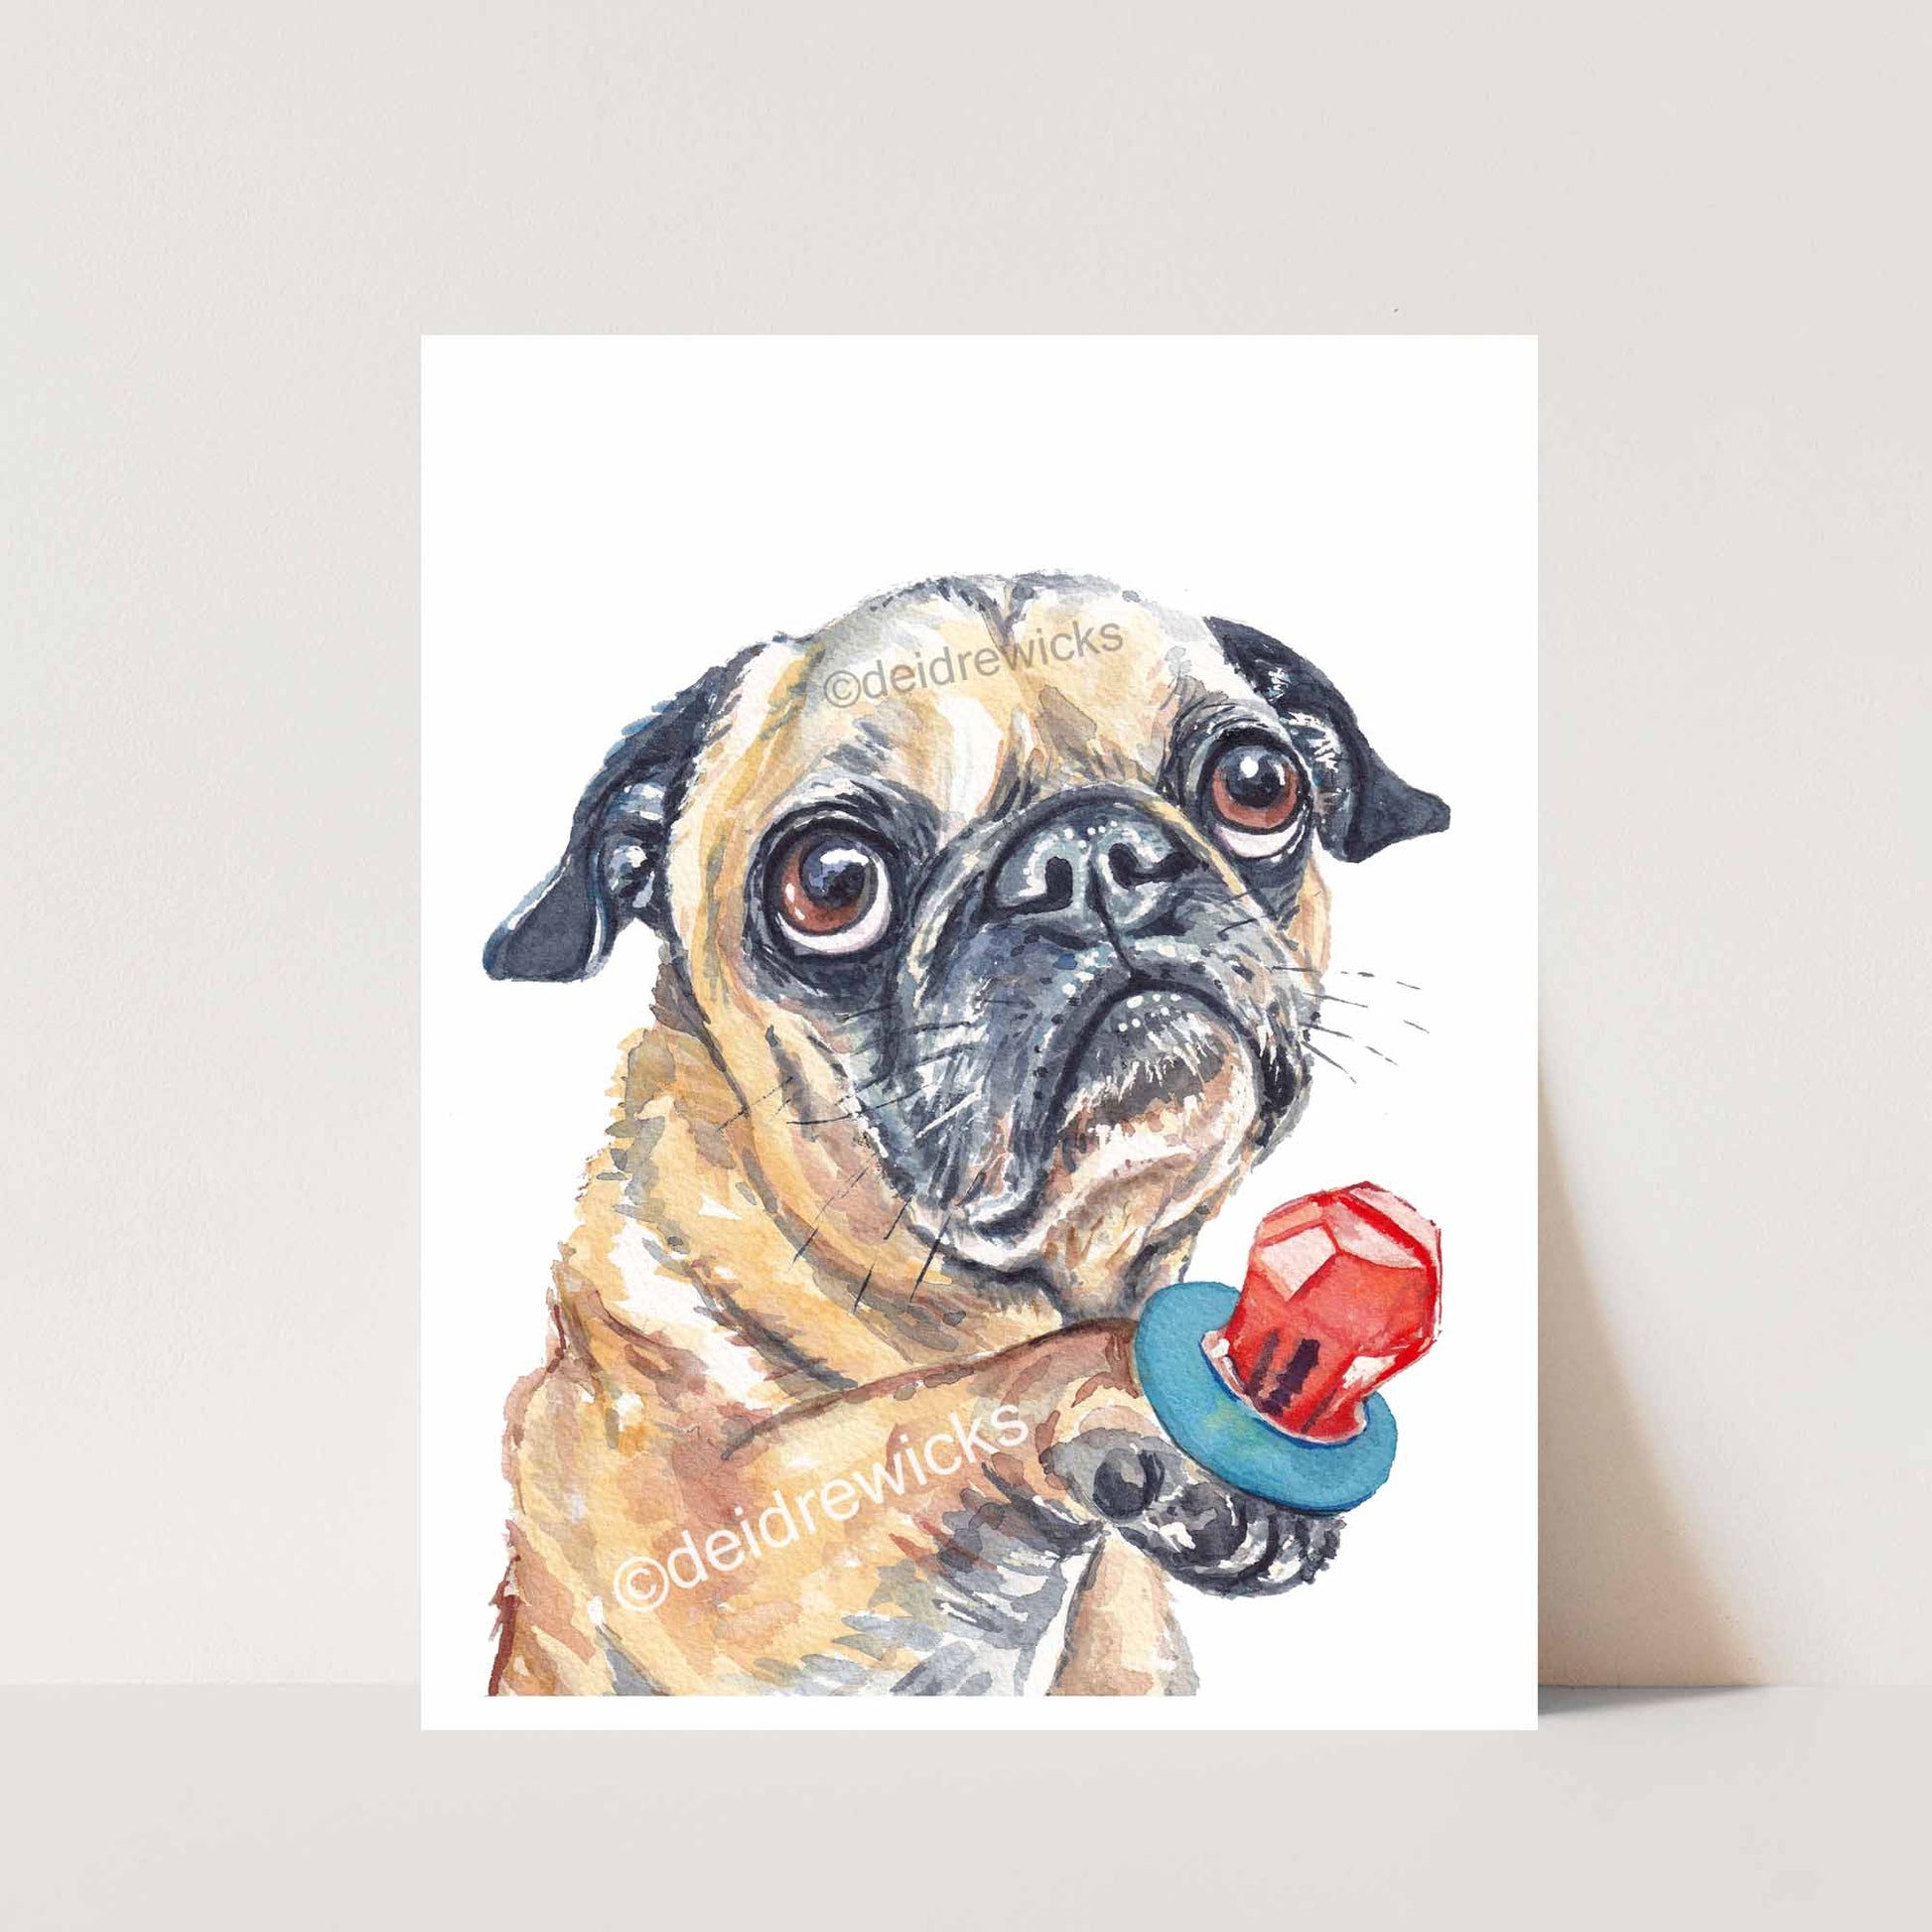 Watercolour painting print featuring an adorable pug dog offering a lick of his candy ring lollipop. Original art by Deidre Wicks